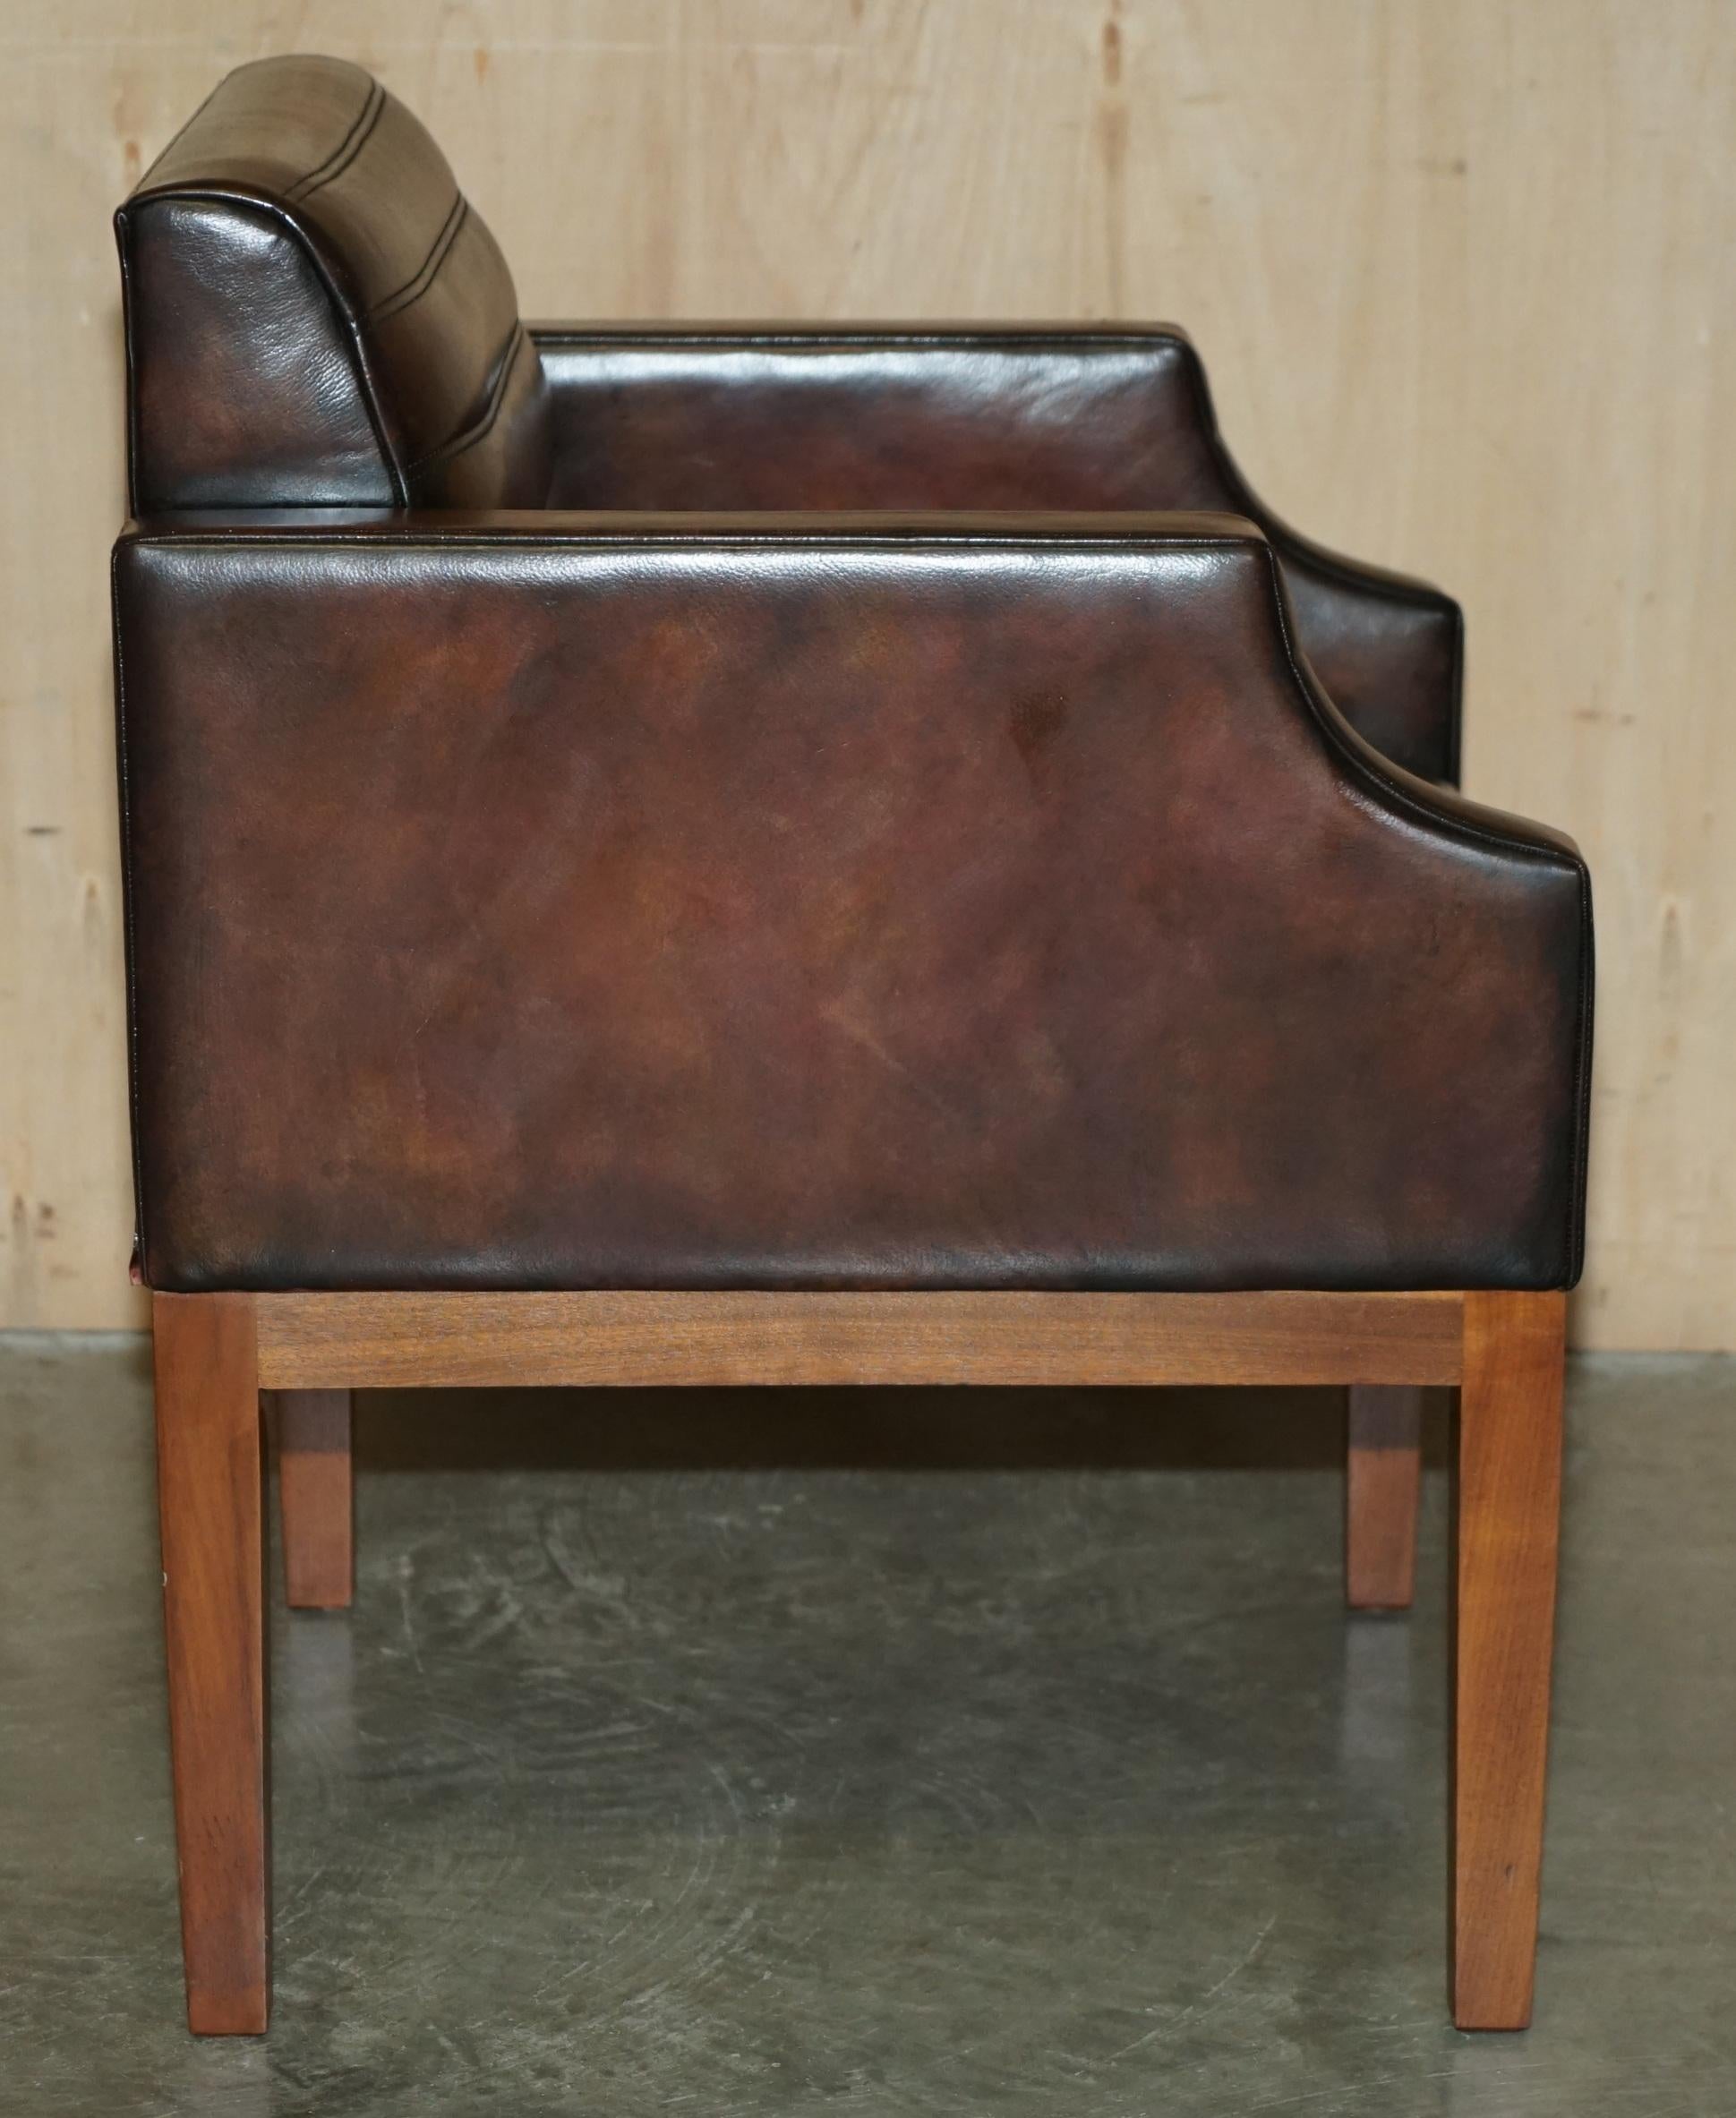 FULLY RESTORED VISCOUNT DAVID LINLEY ONE OF A KIND BROWN LEATHER DESK ARMCHAiR For Sale 3